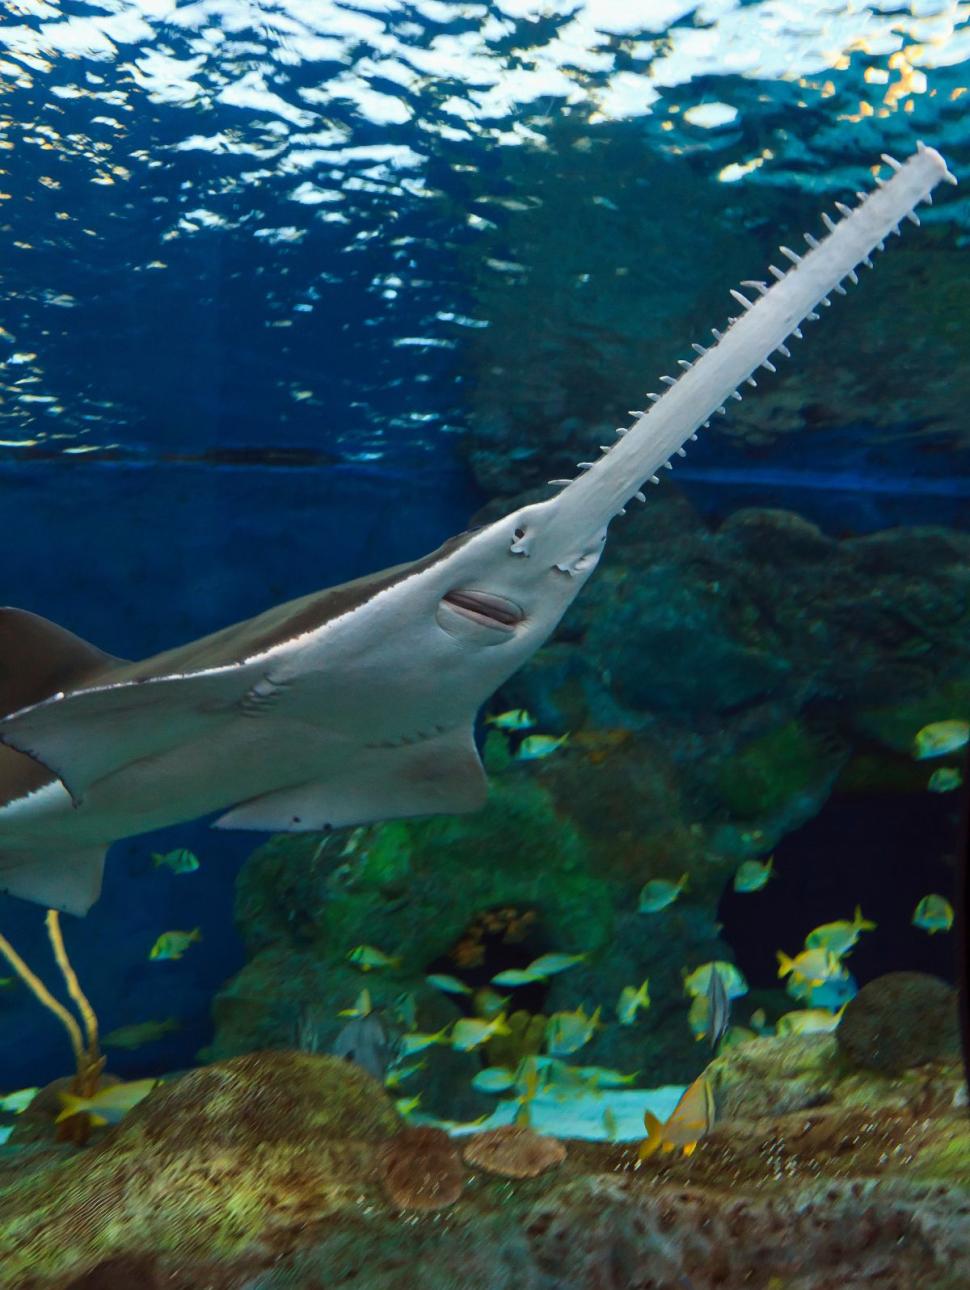 Sawfish underwater close up detail of mouth and saw in an aquarium